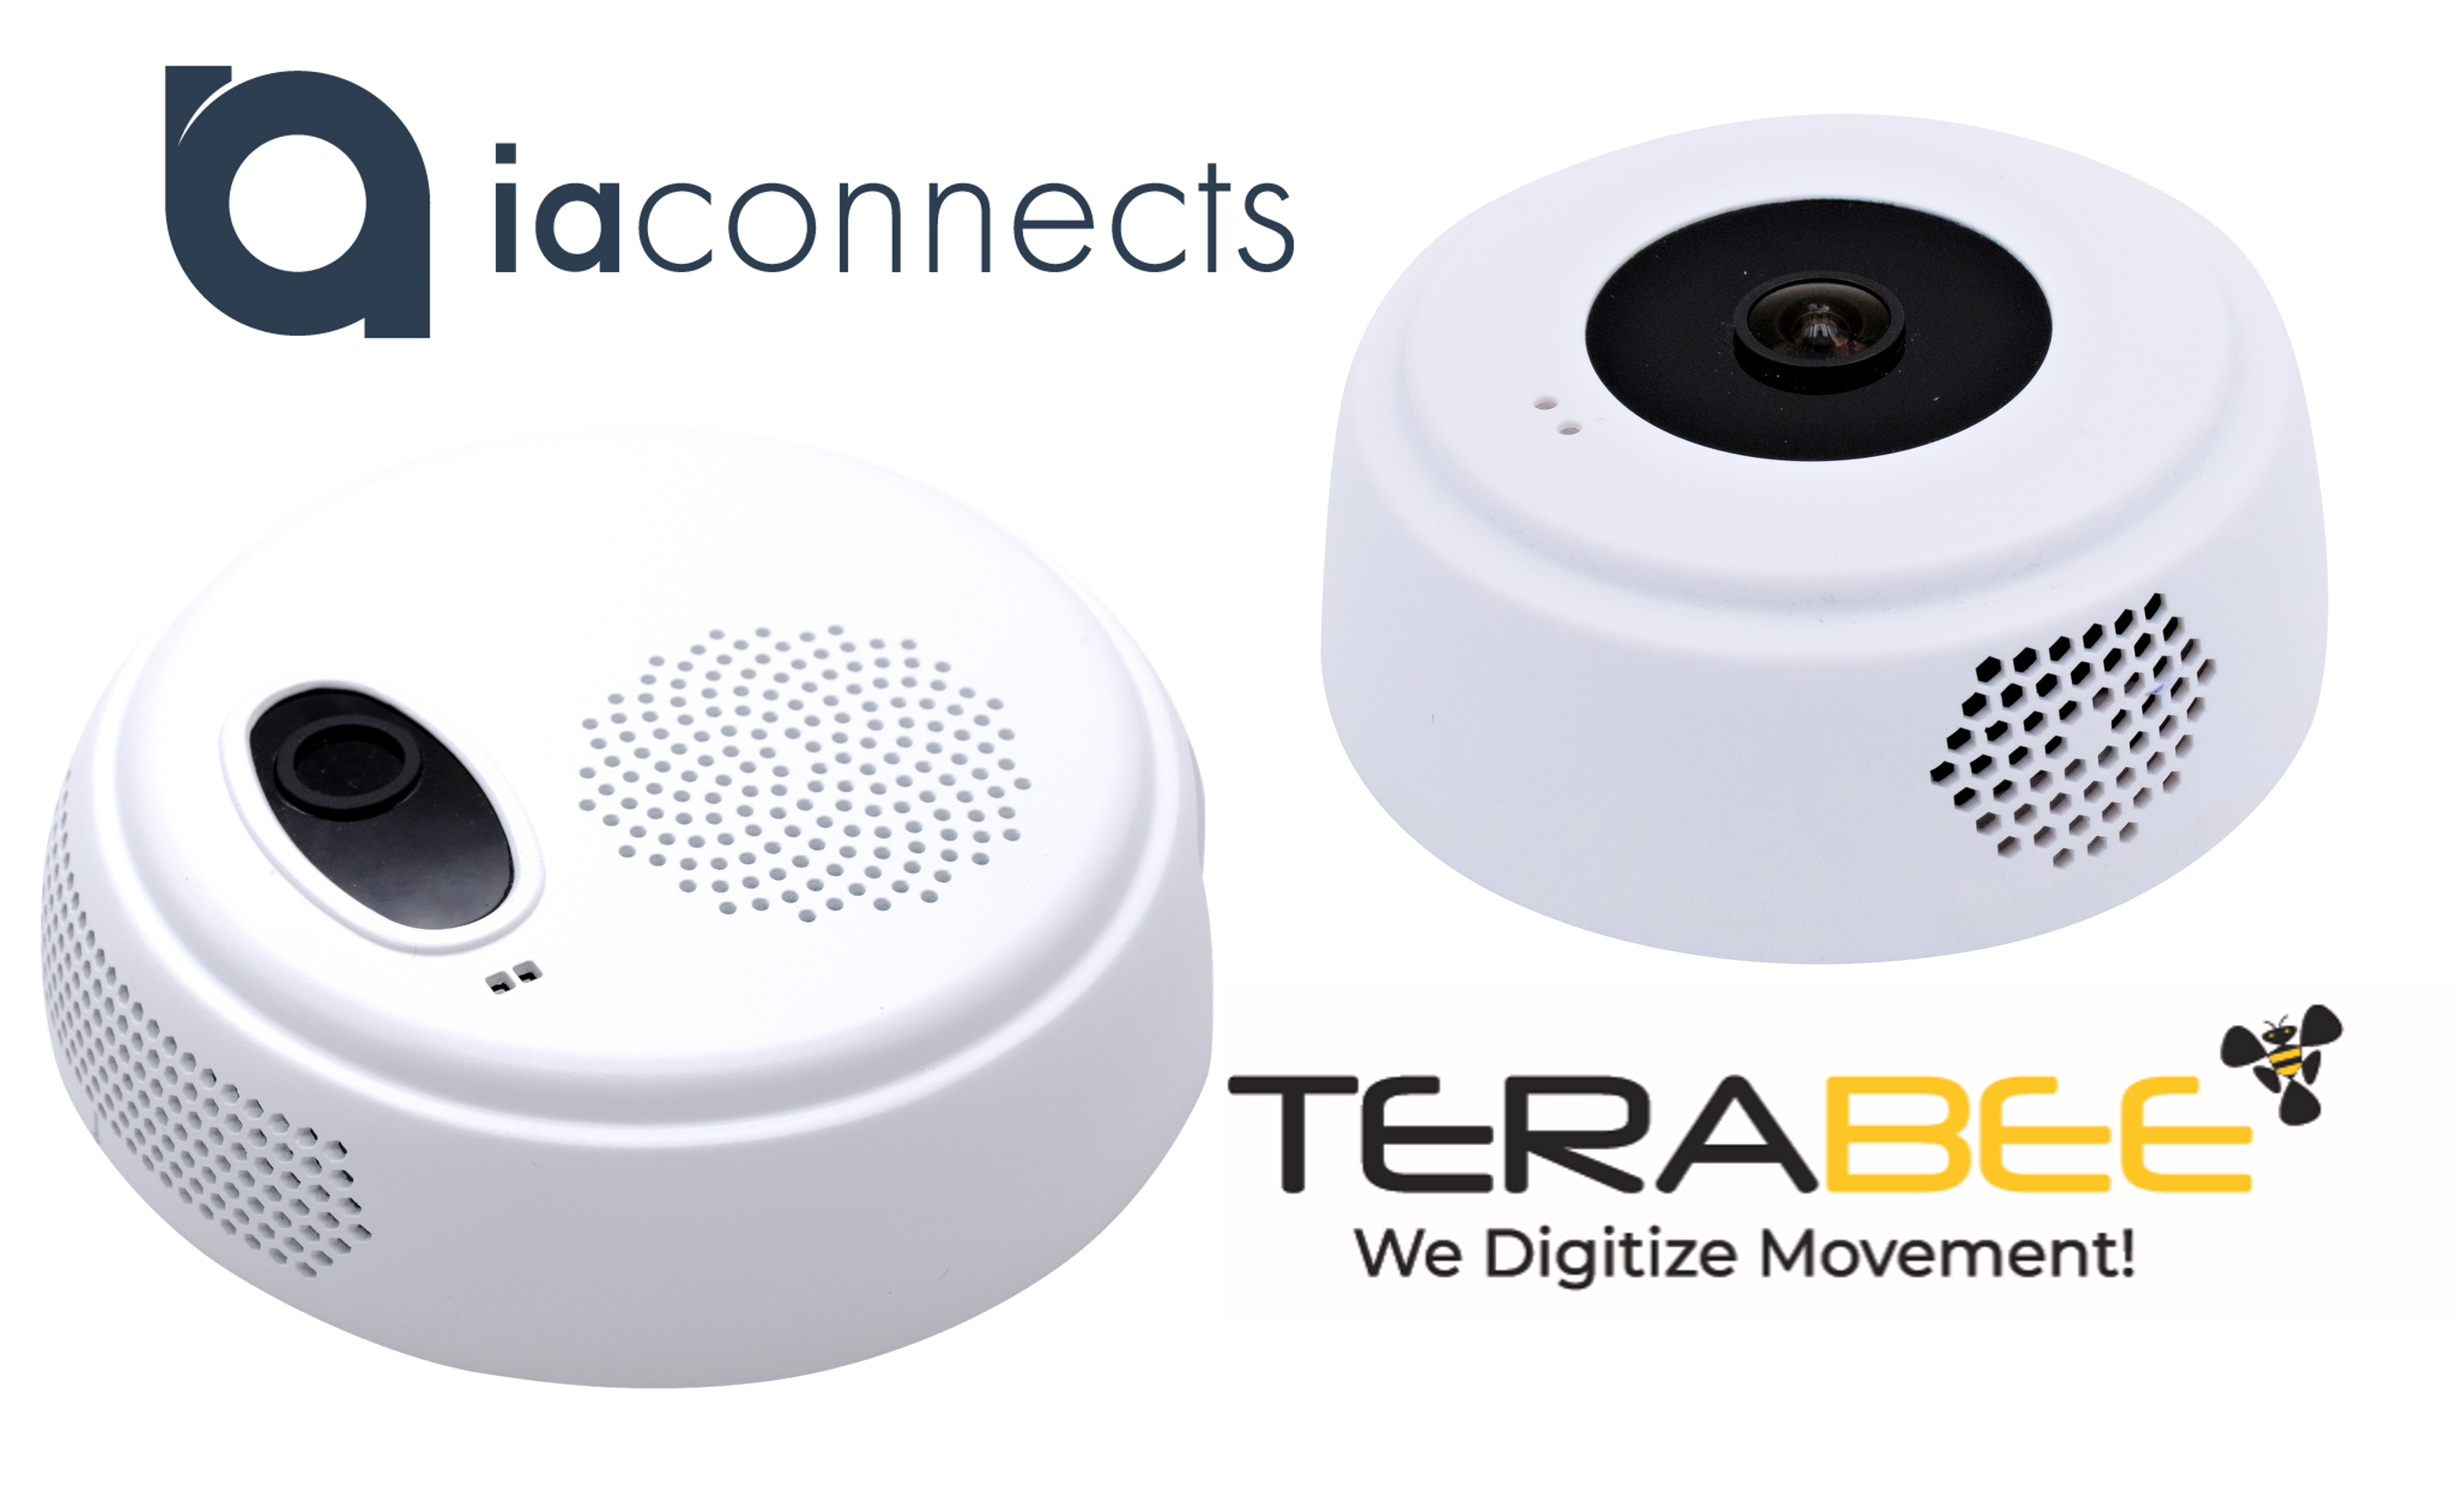 Iaconnects Features Terabee People Counting Devices